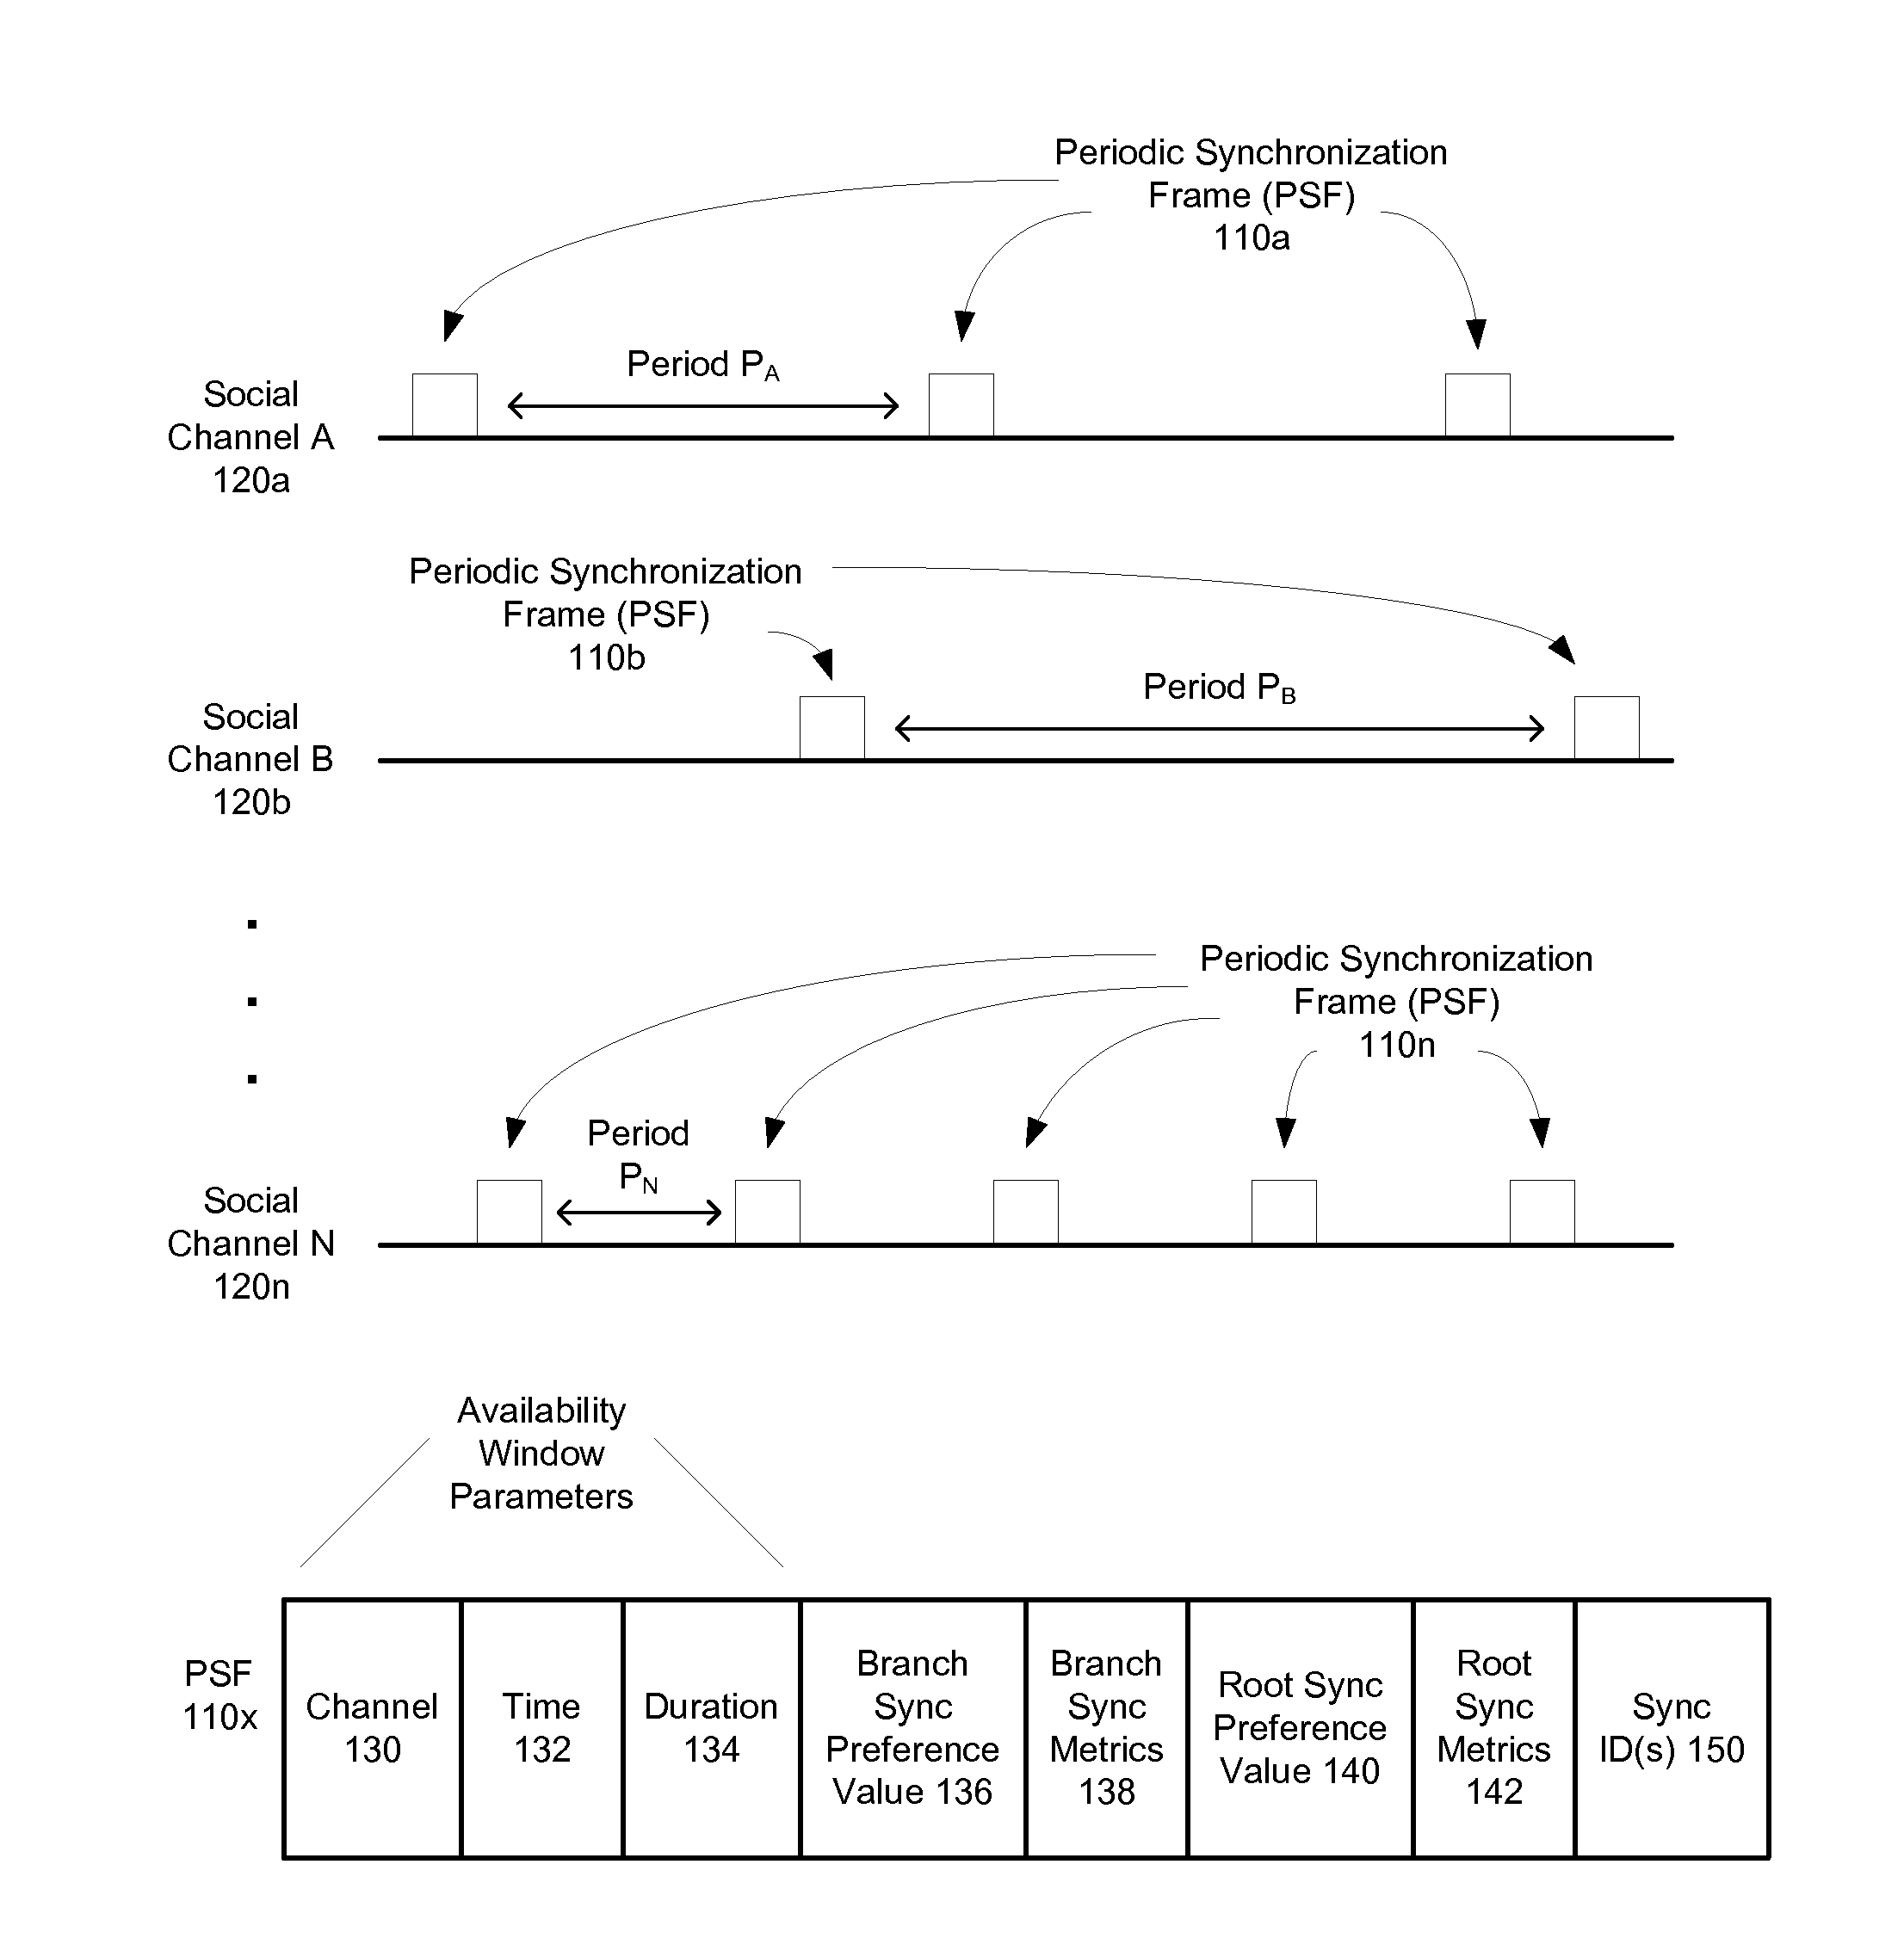 Group formation within a synchronized hierarchy of peer-to-peer devices